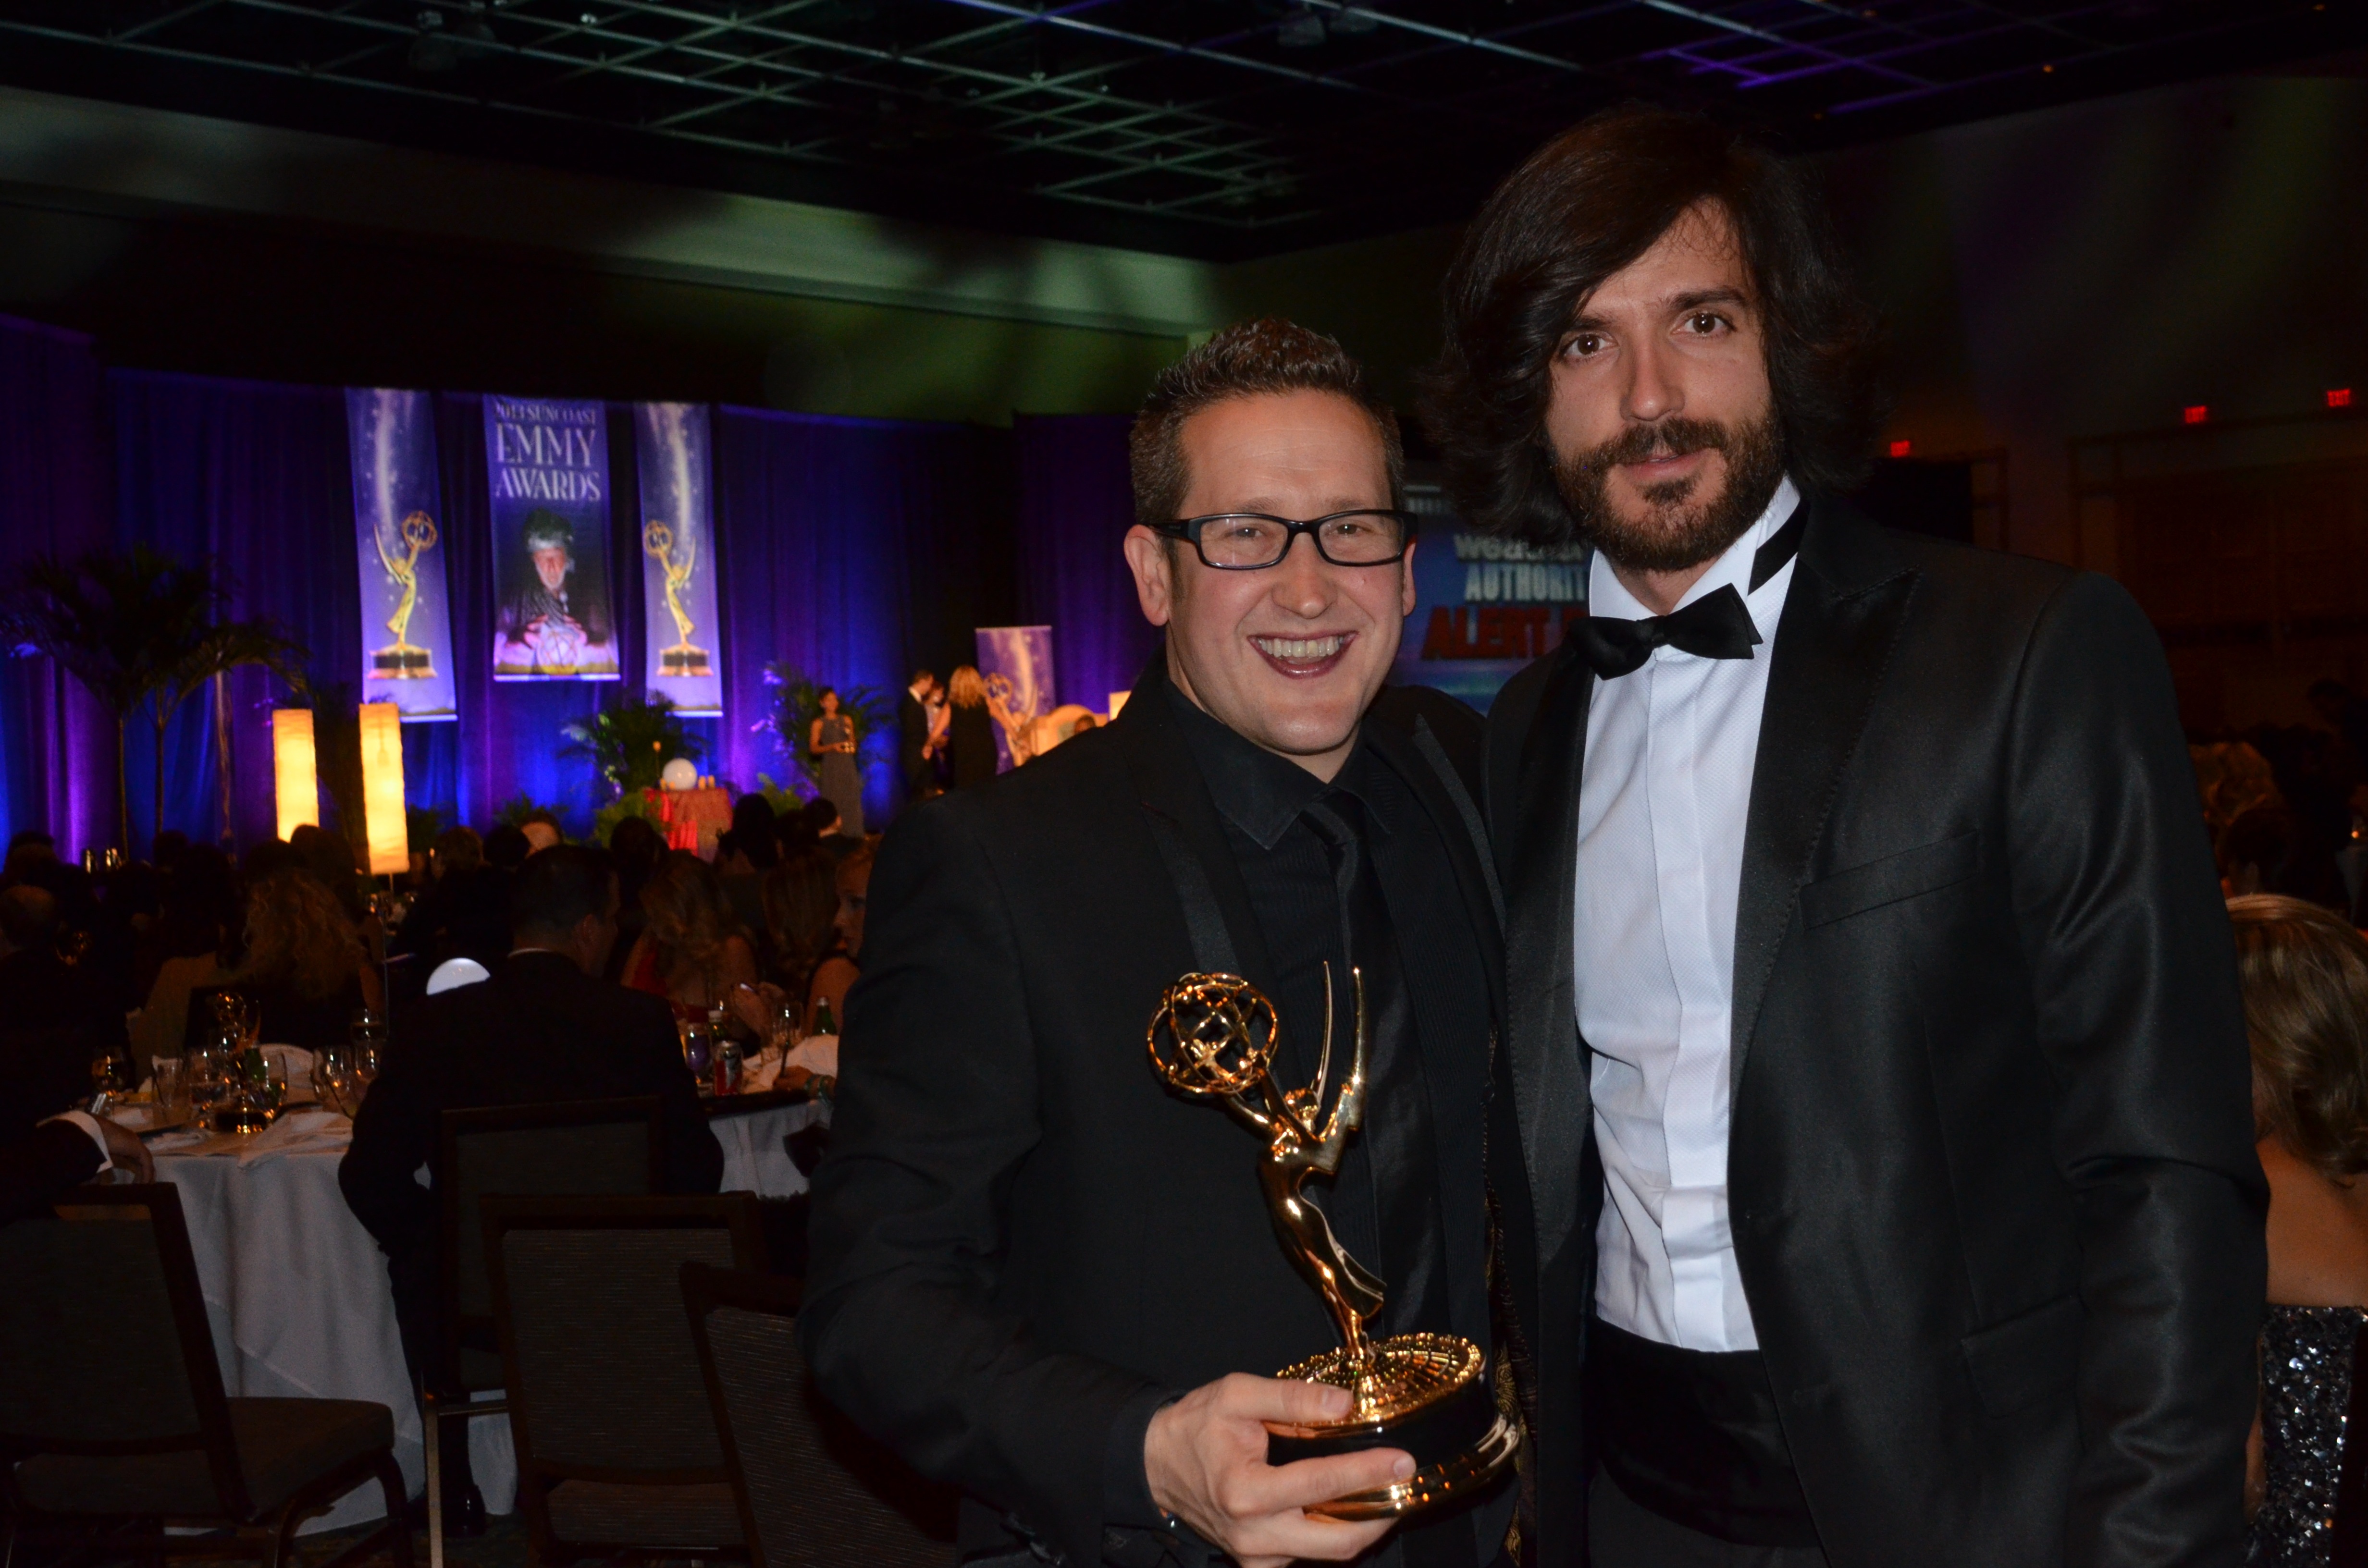 Celebrity Films brings home 2 Emmy Awards for the documentary 